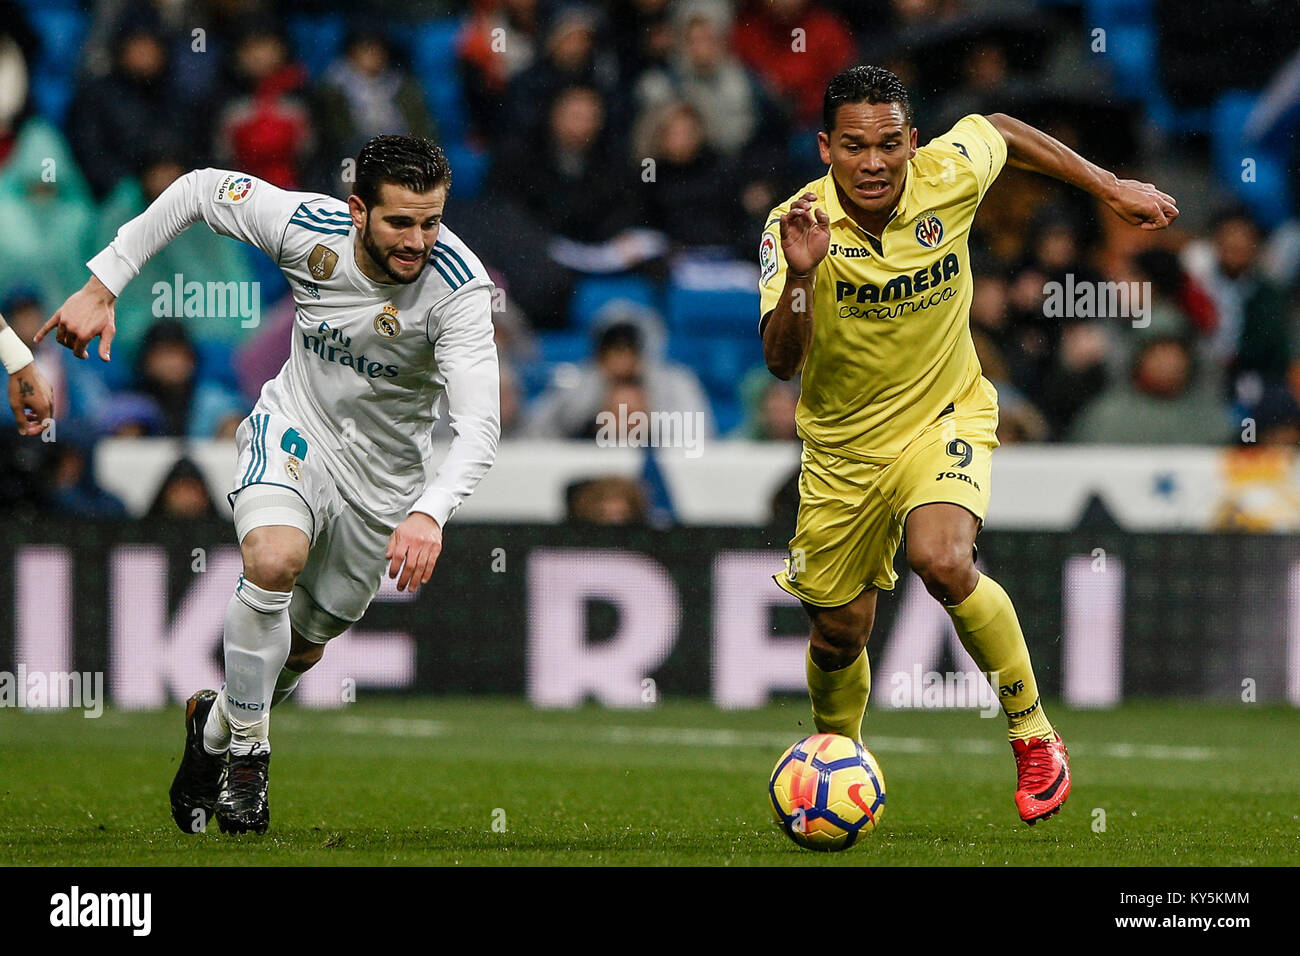 Carlos Bacca (Villerreal CF) fights for control of the ball Jose I. Fernandez, NACHO (Real Madrid), La Liga match between Real Madrid vs Villerreal CF at the Santiago Bernabeu stadium in Madrid, Spain, January 13, 2018. Credit: Gtres Información más Comuniación on line, S.L./Alamy Live News Stock Photo